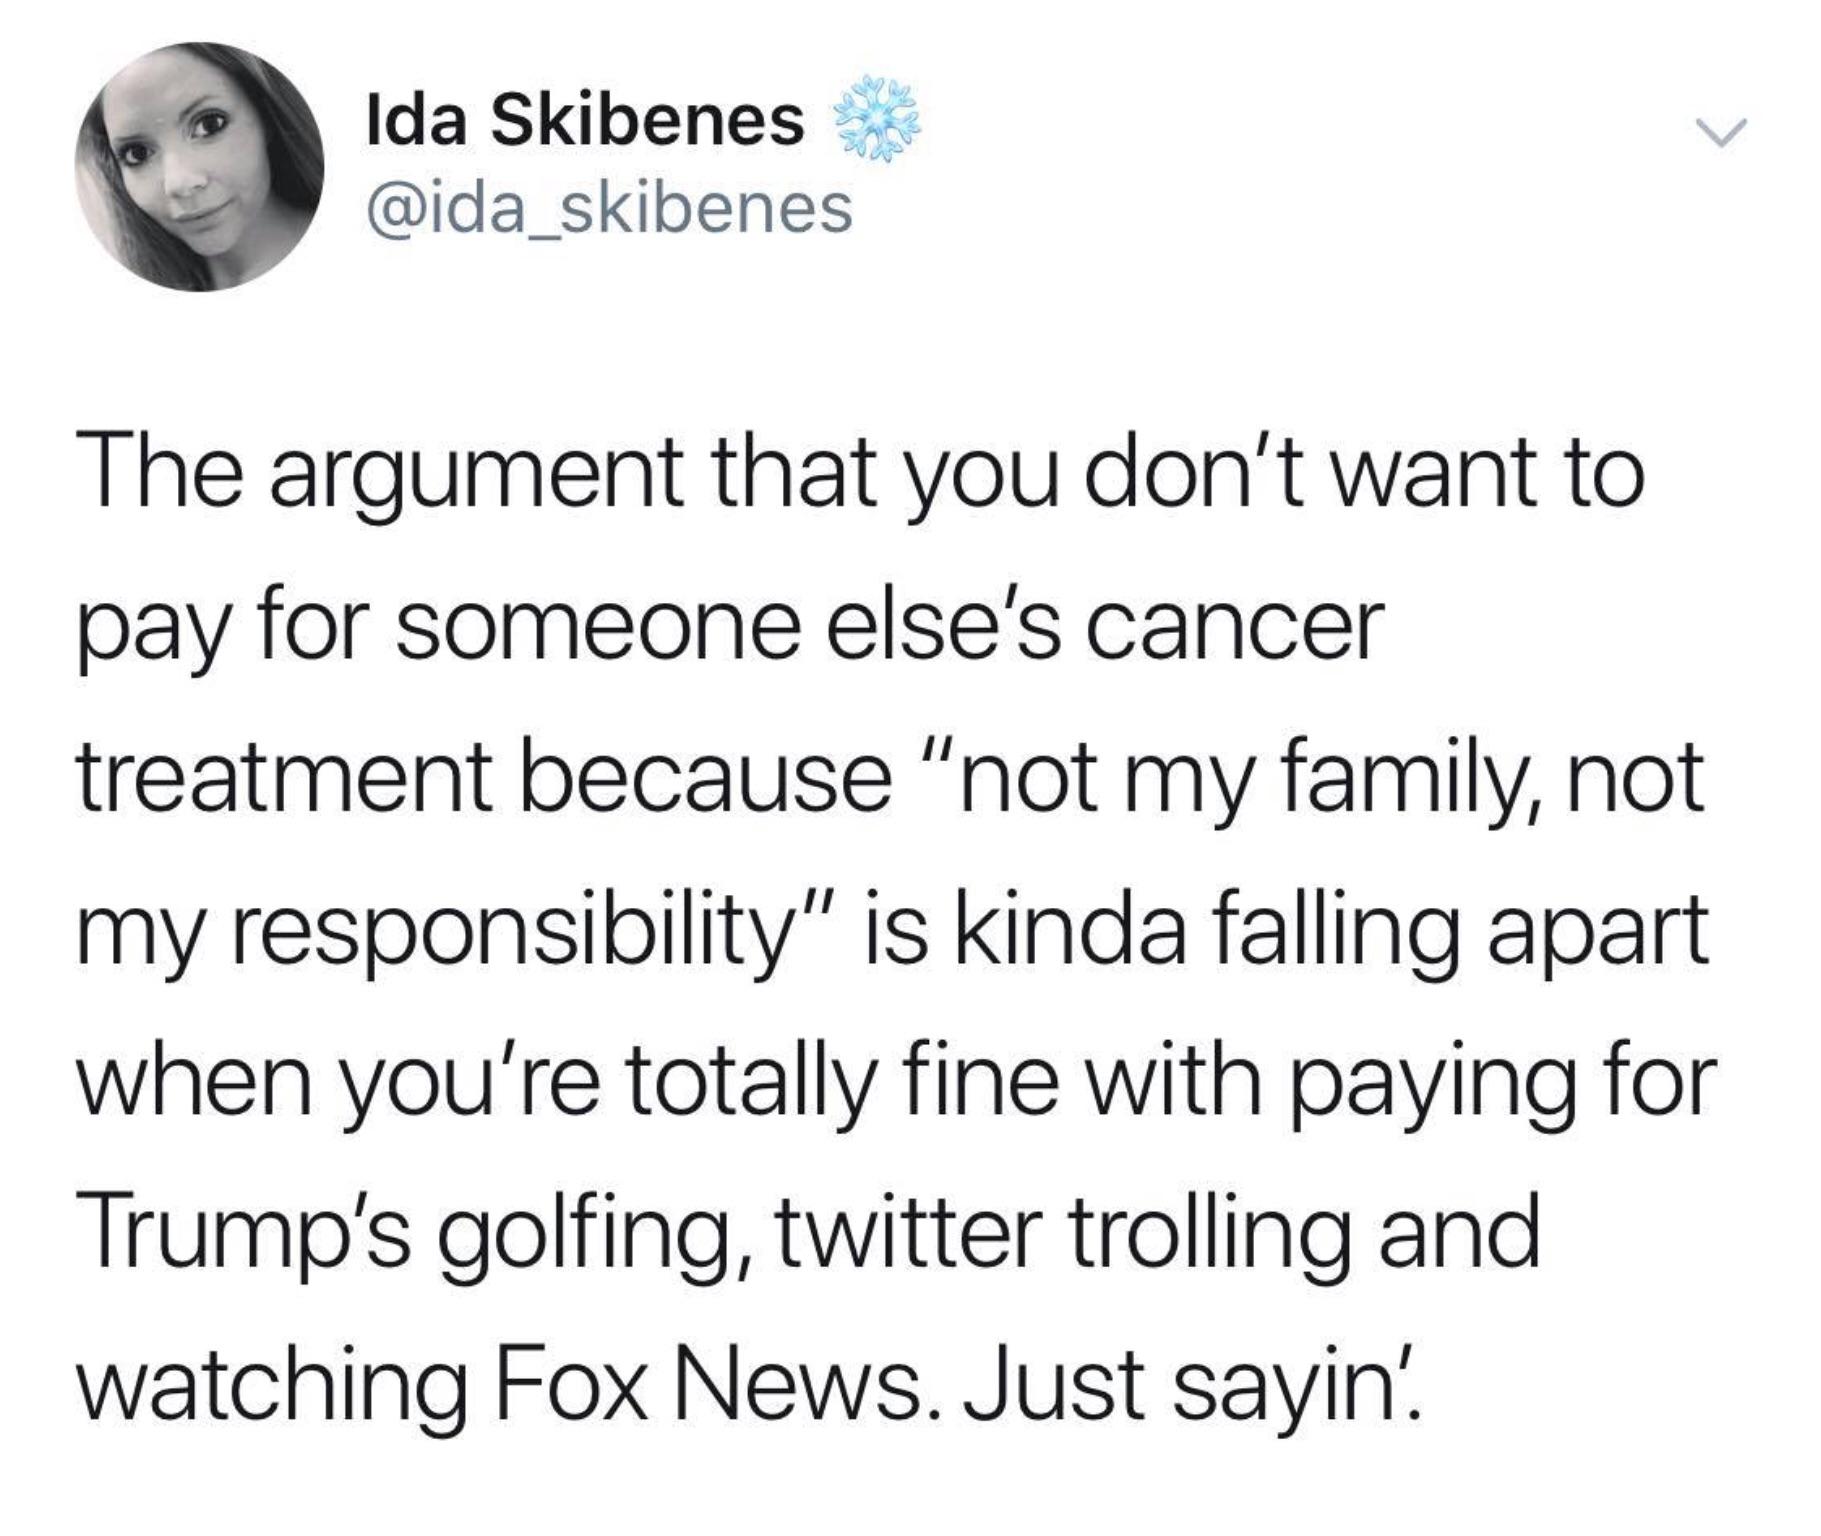 political political-memes political text: Ida Skibenes @ida_skibenes The argument that you don't want to pay for someone else's cancer treatment because 